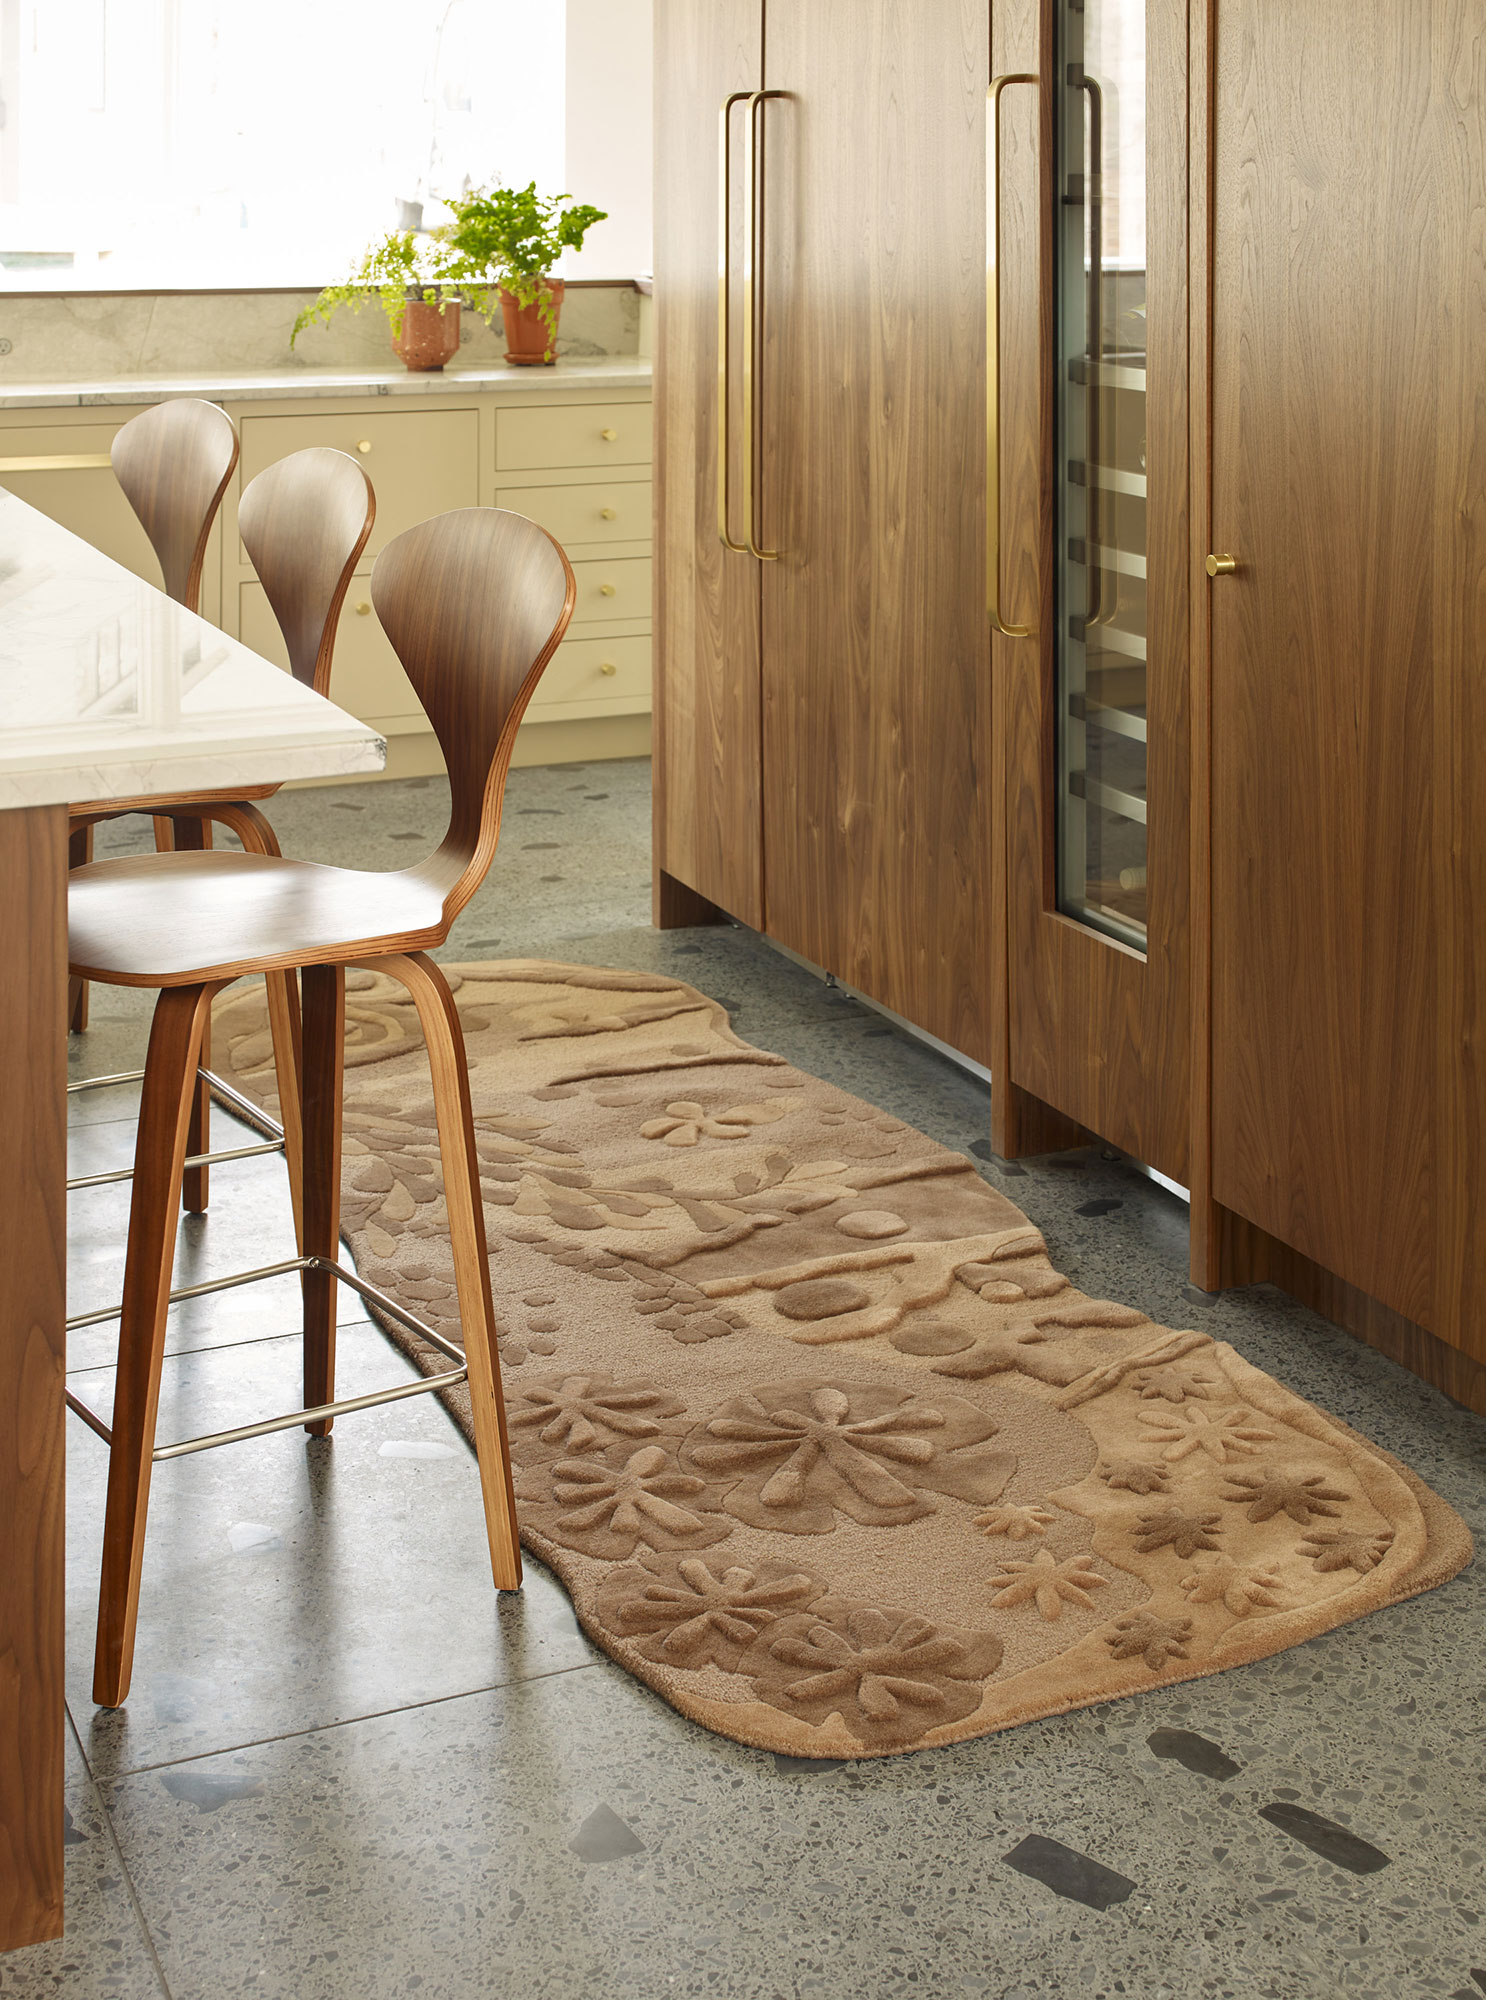 A soft brown and tan runner rug by Angela Adams called Eden Dove